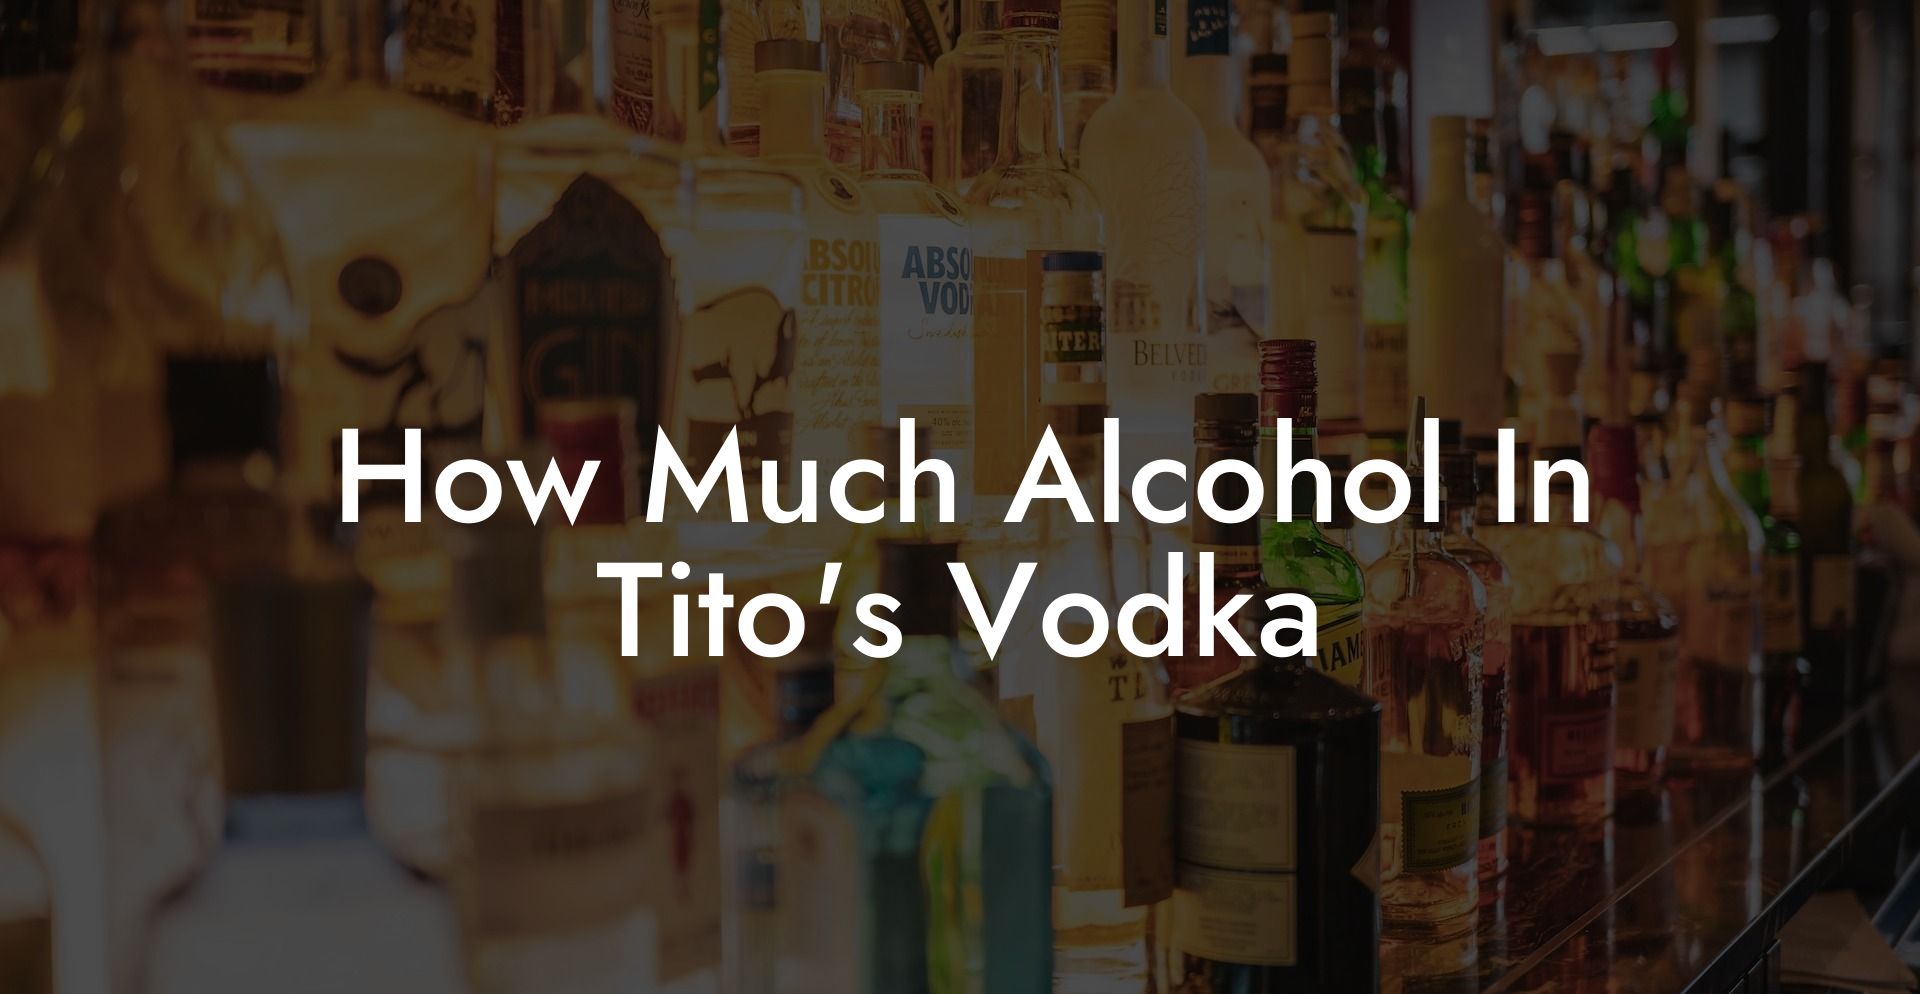 How Much Alcohol In Tito's Vodka